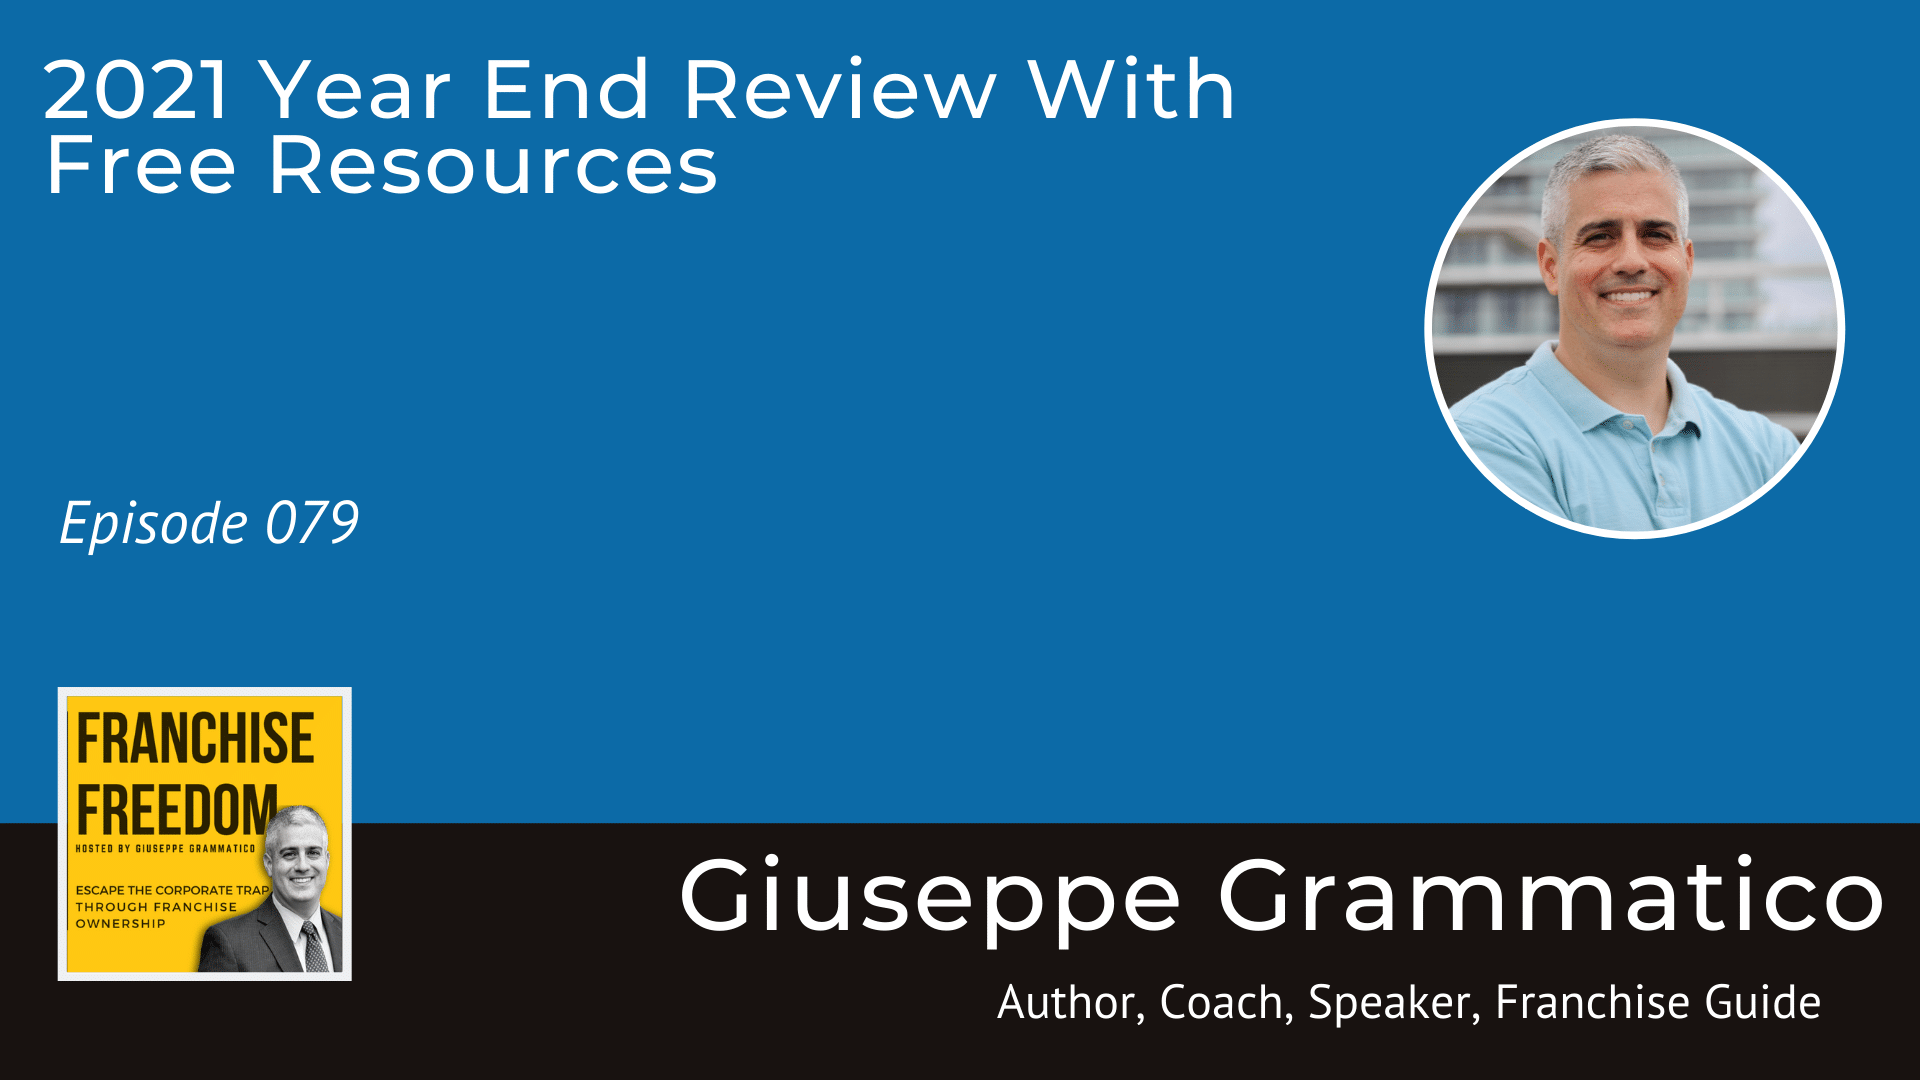 2021 Year End Review With Free Resources with Giuseppe Grammatico